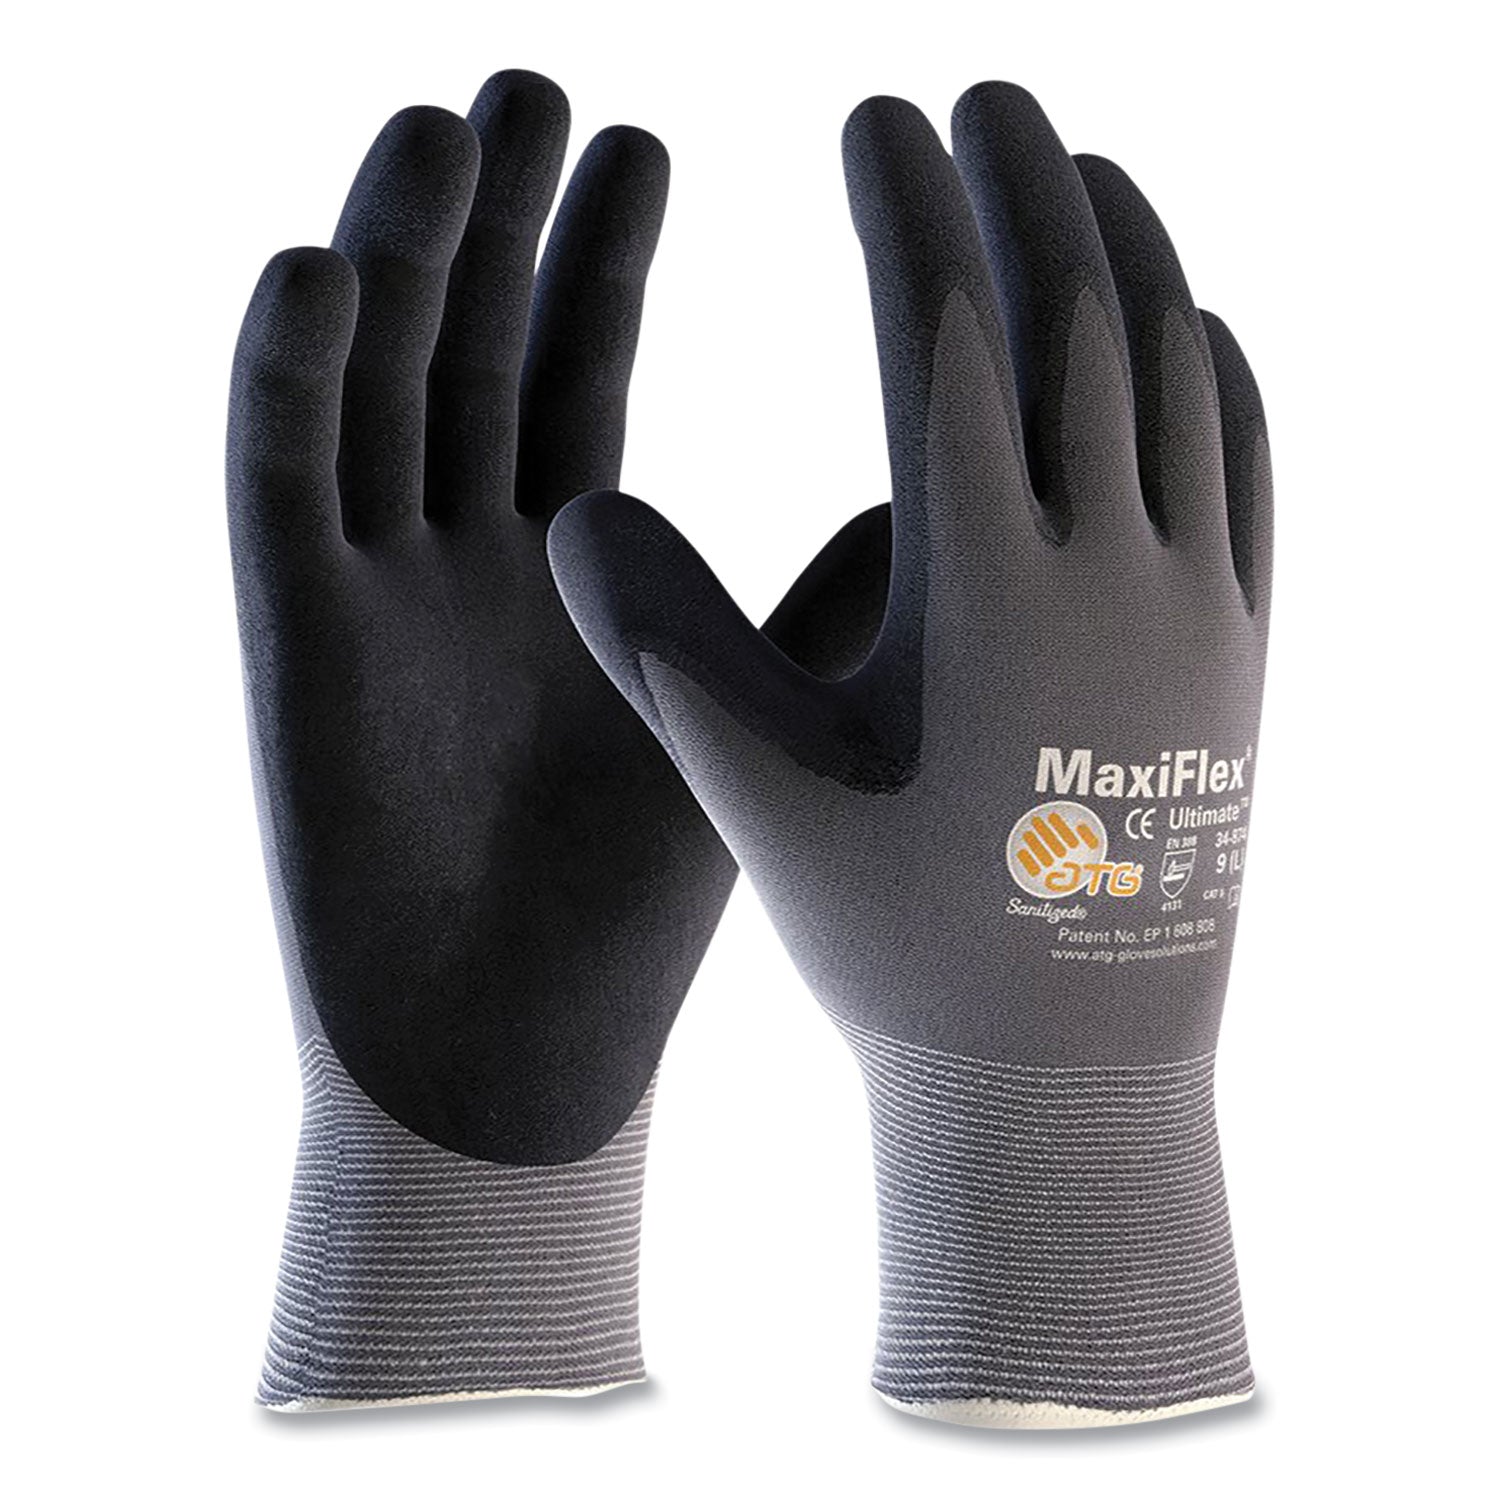 ultimate-seamless-knit-nylon-gloves-nitrile-coated-microfoam-grip-on-palm-and-fingers-small-gray-12-pairs_pid34874s - 1